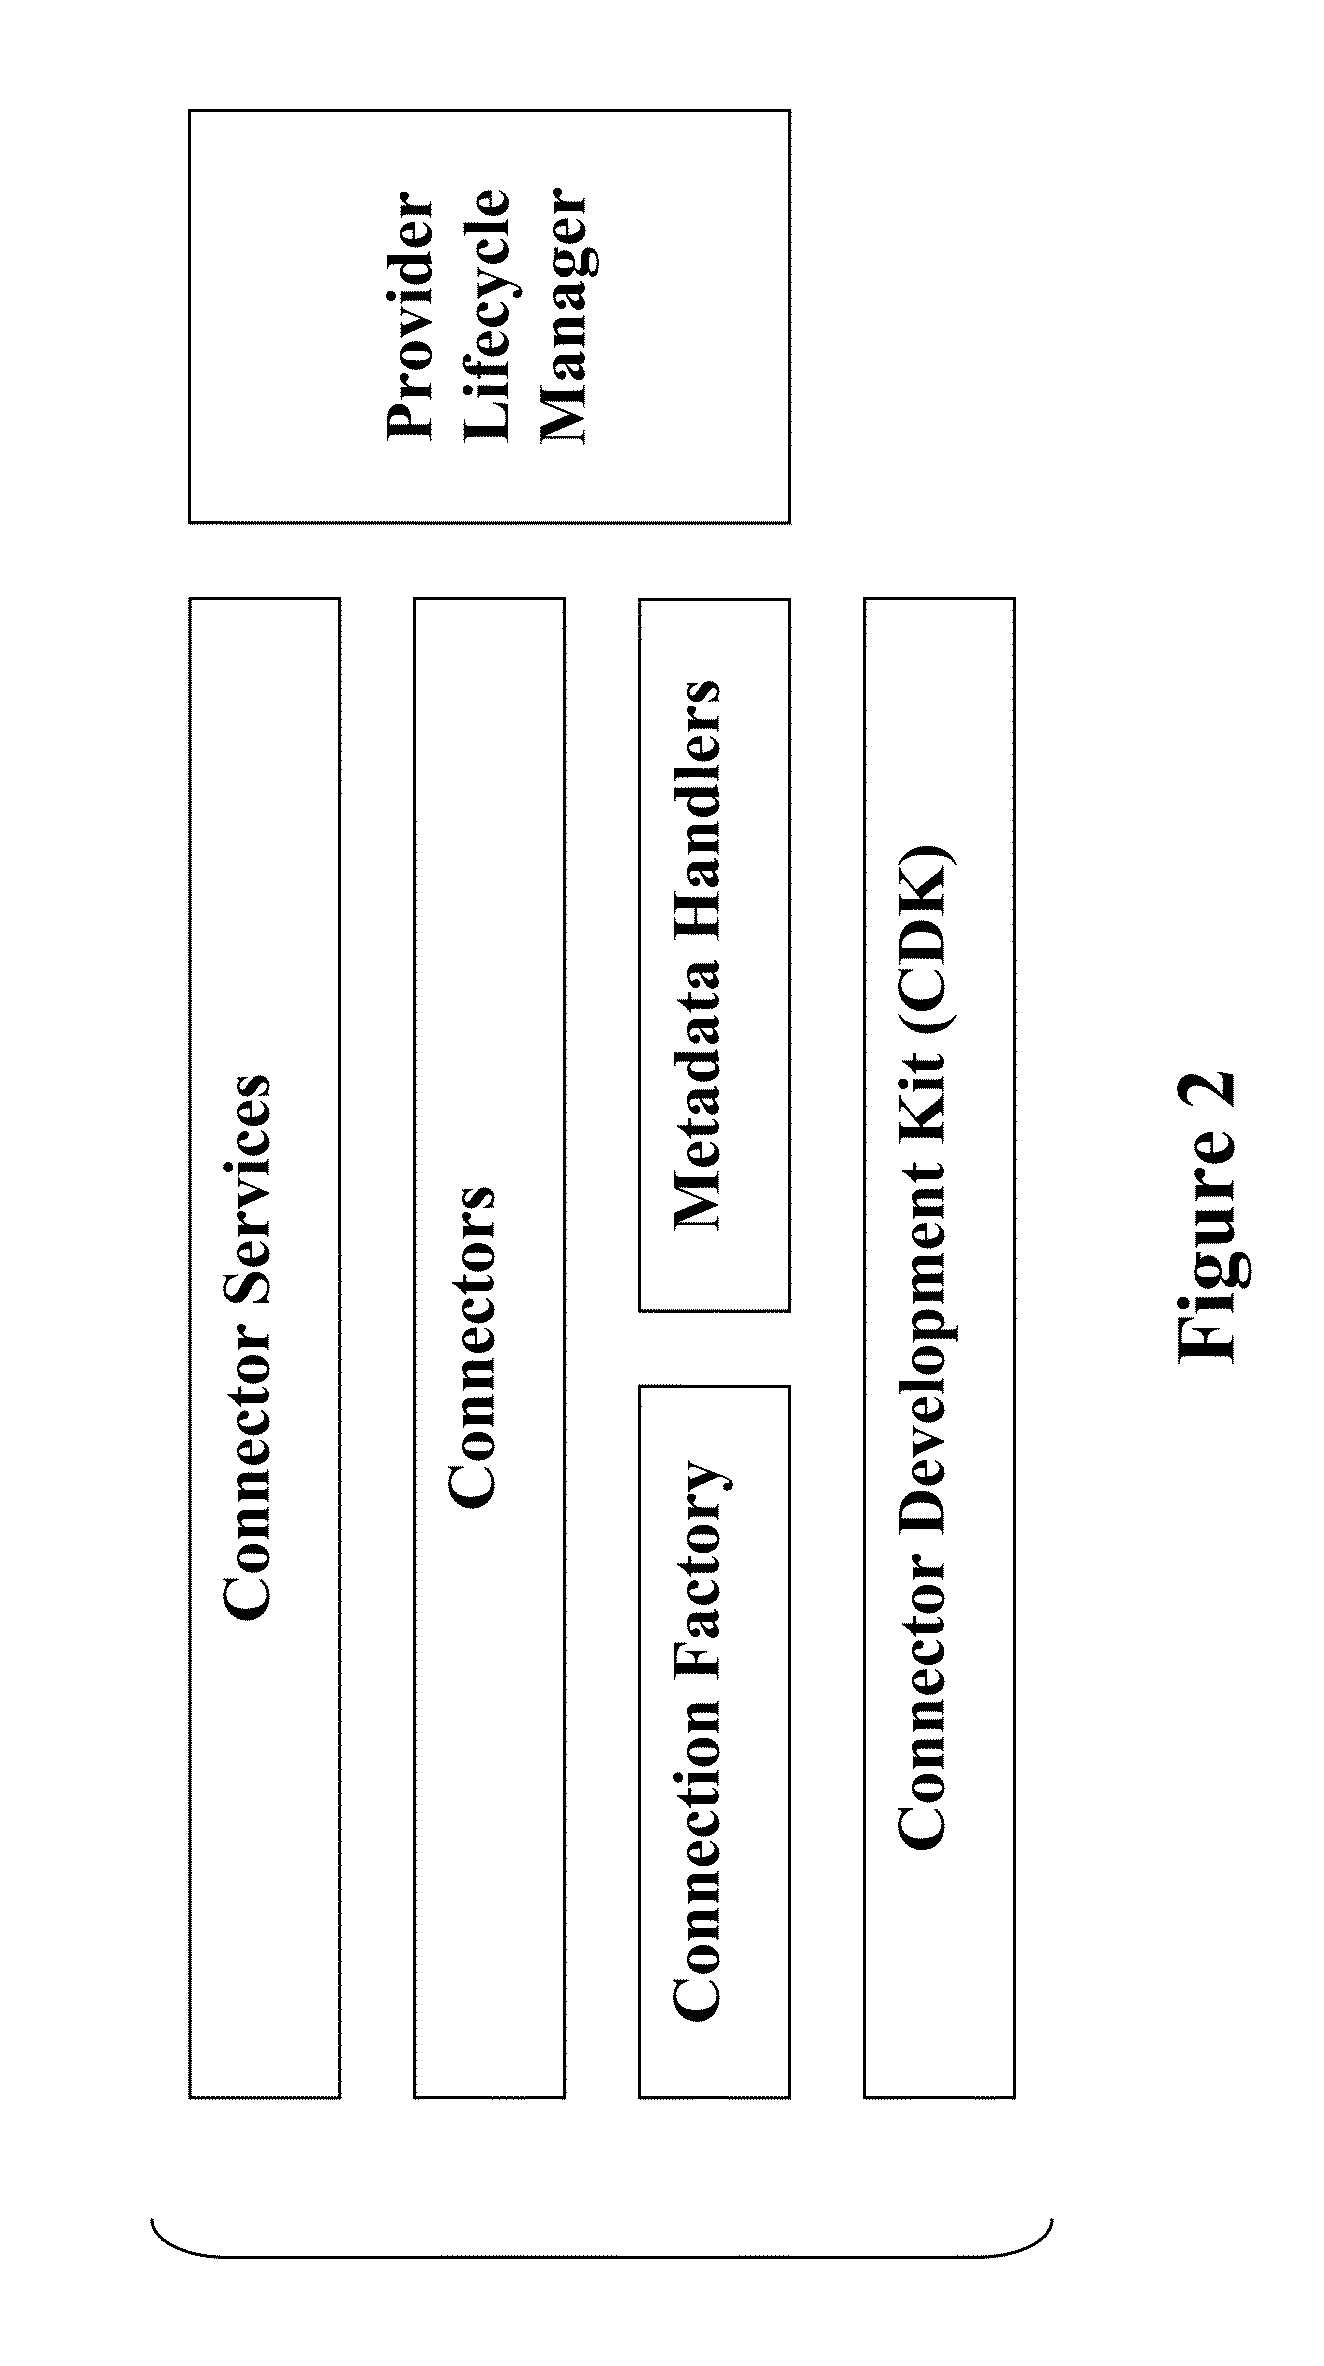 SYSTEMS AND/OR METHODS FOR SUPPORTING A GENERIC FRAMEWORK FOR INTEGRATION OF ON-PREMISES AND SaaS APPLICATIONS WITH SECURITY, SERVICE MEDIATION, ADMINISTRATIVE, AND/OR MONITORING CAPABILITIES